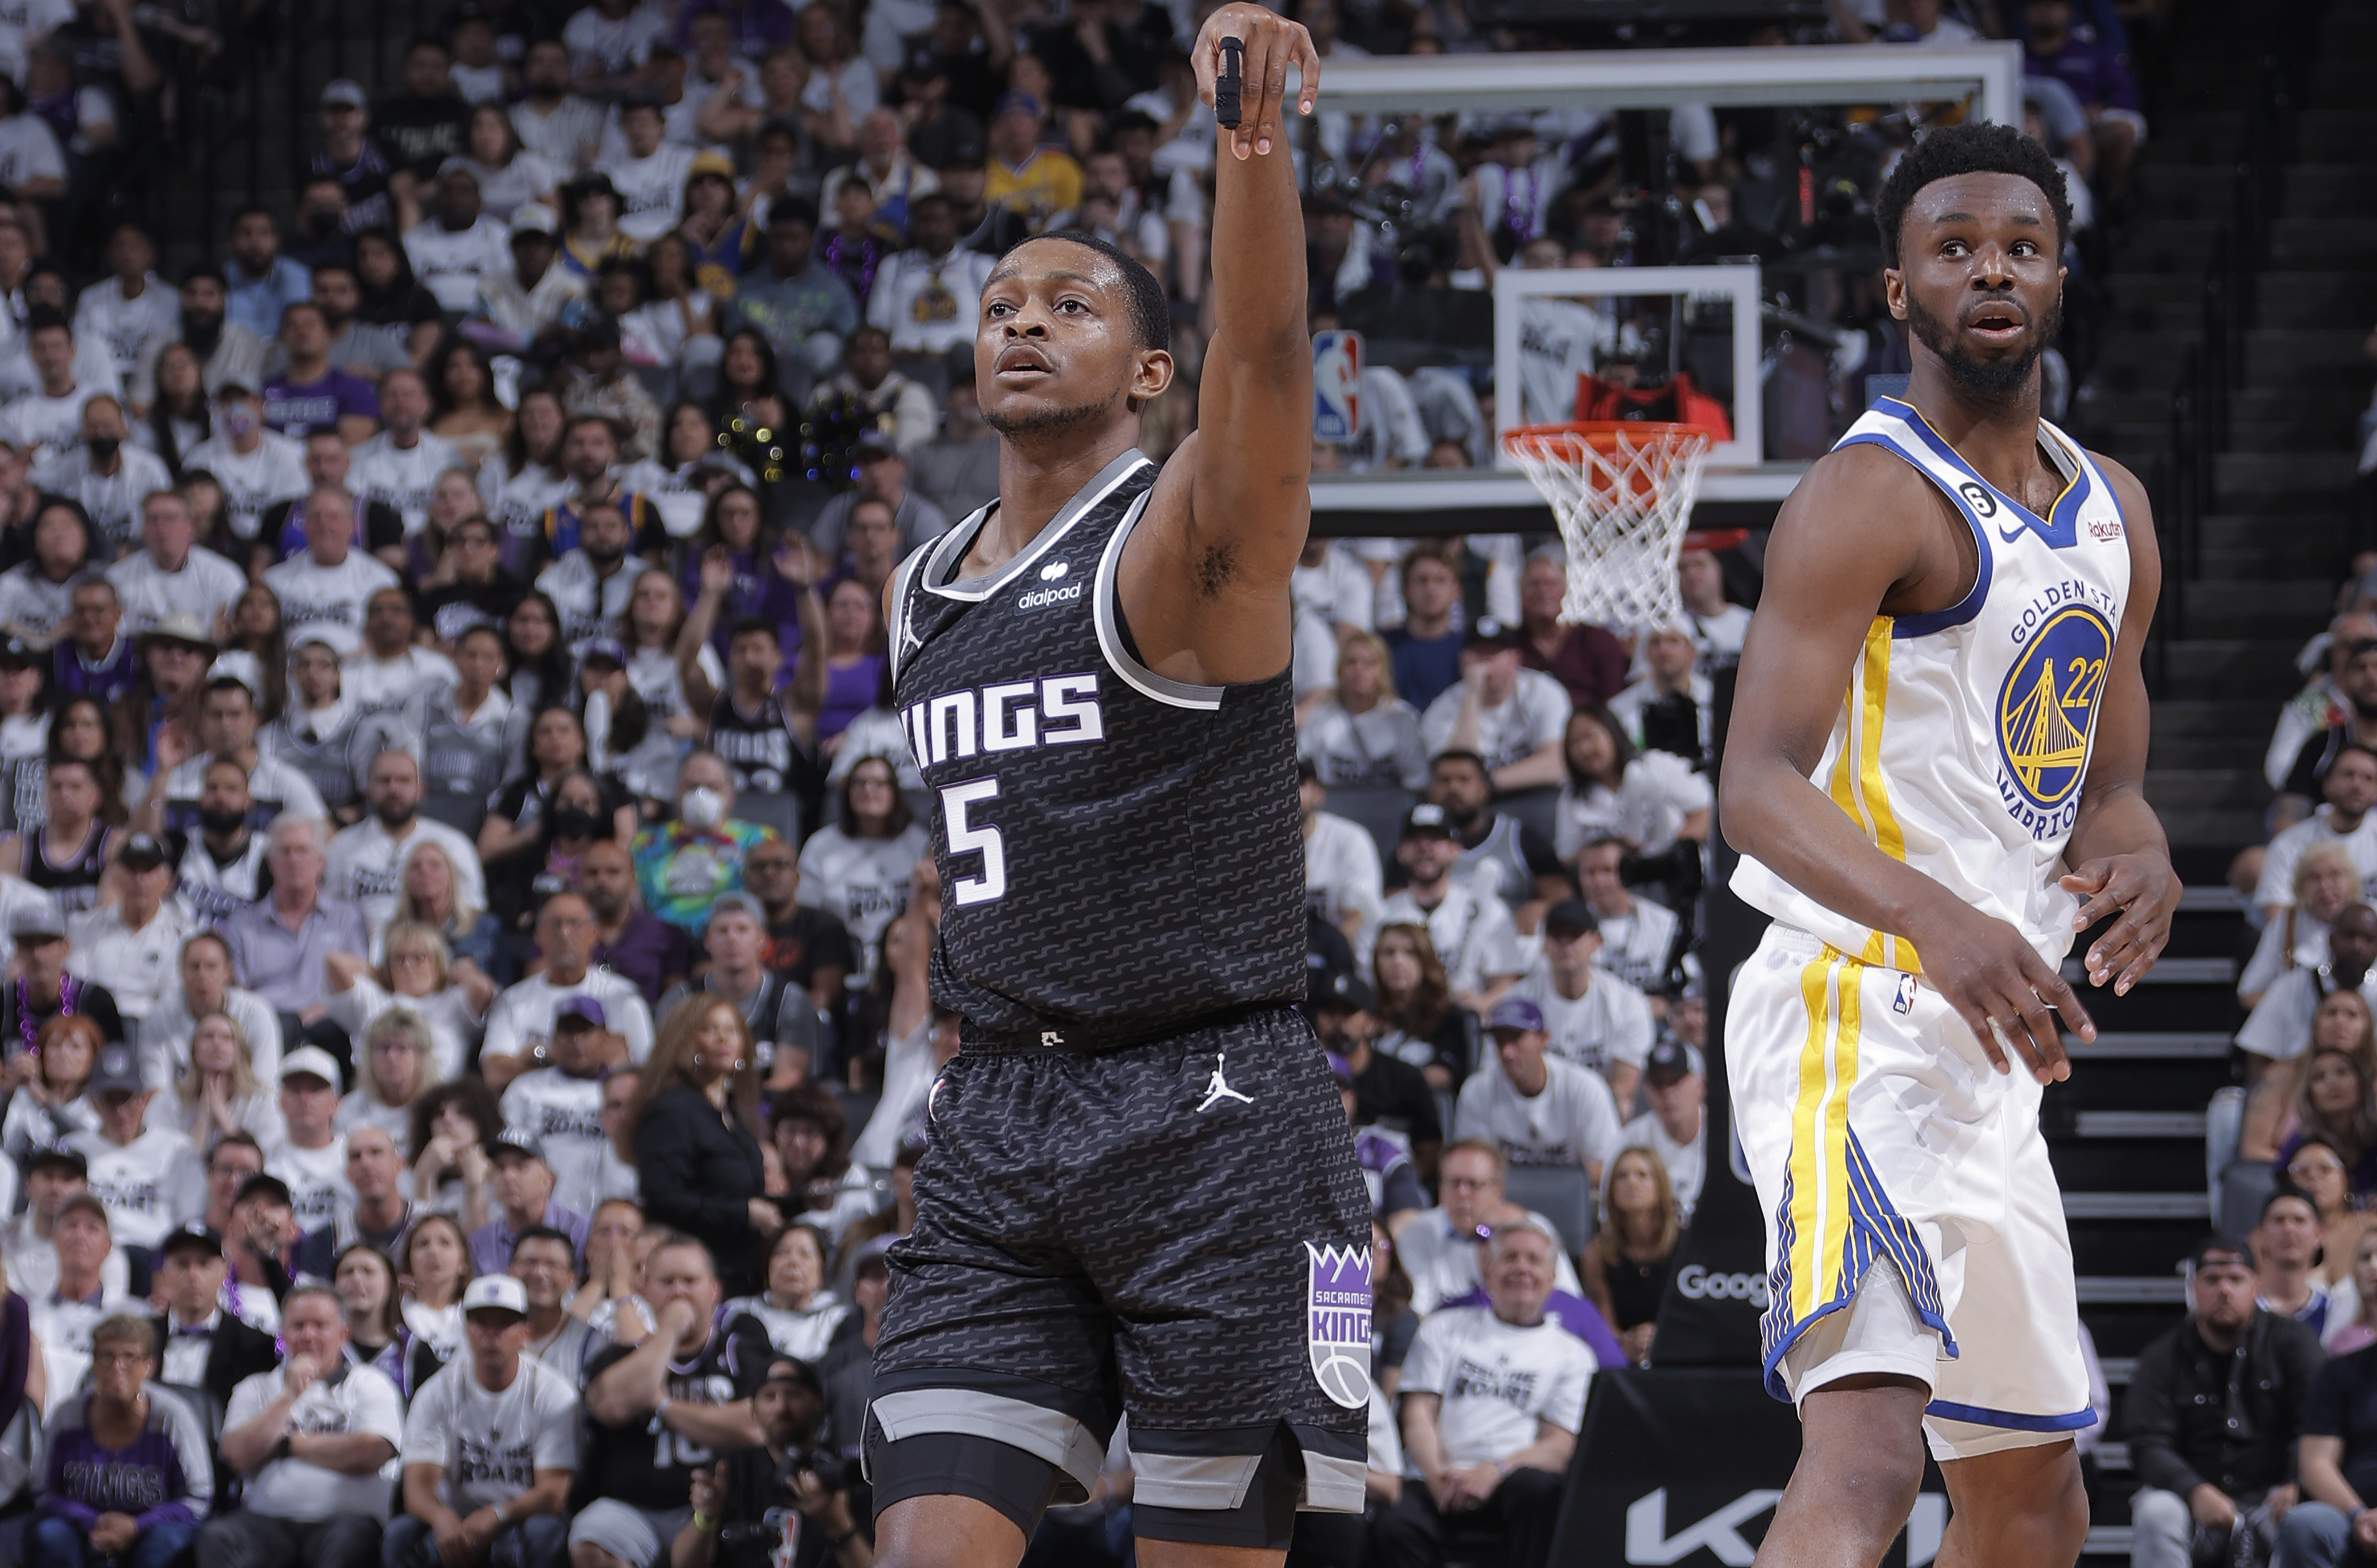 De'Aaron Fox injury update: Kings star plans to play with fractured finger  in Game 5 vs. Warriors